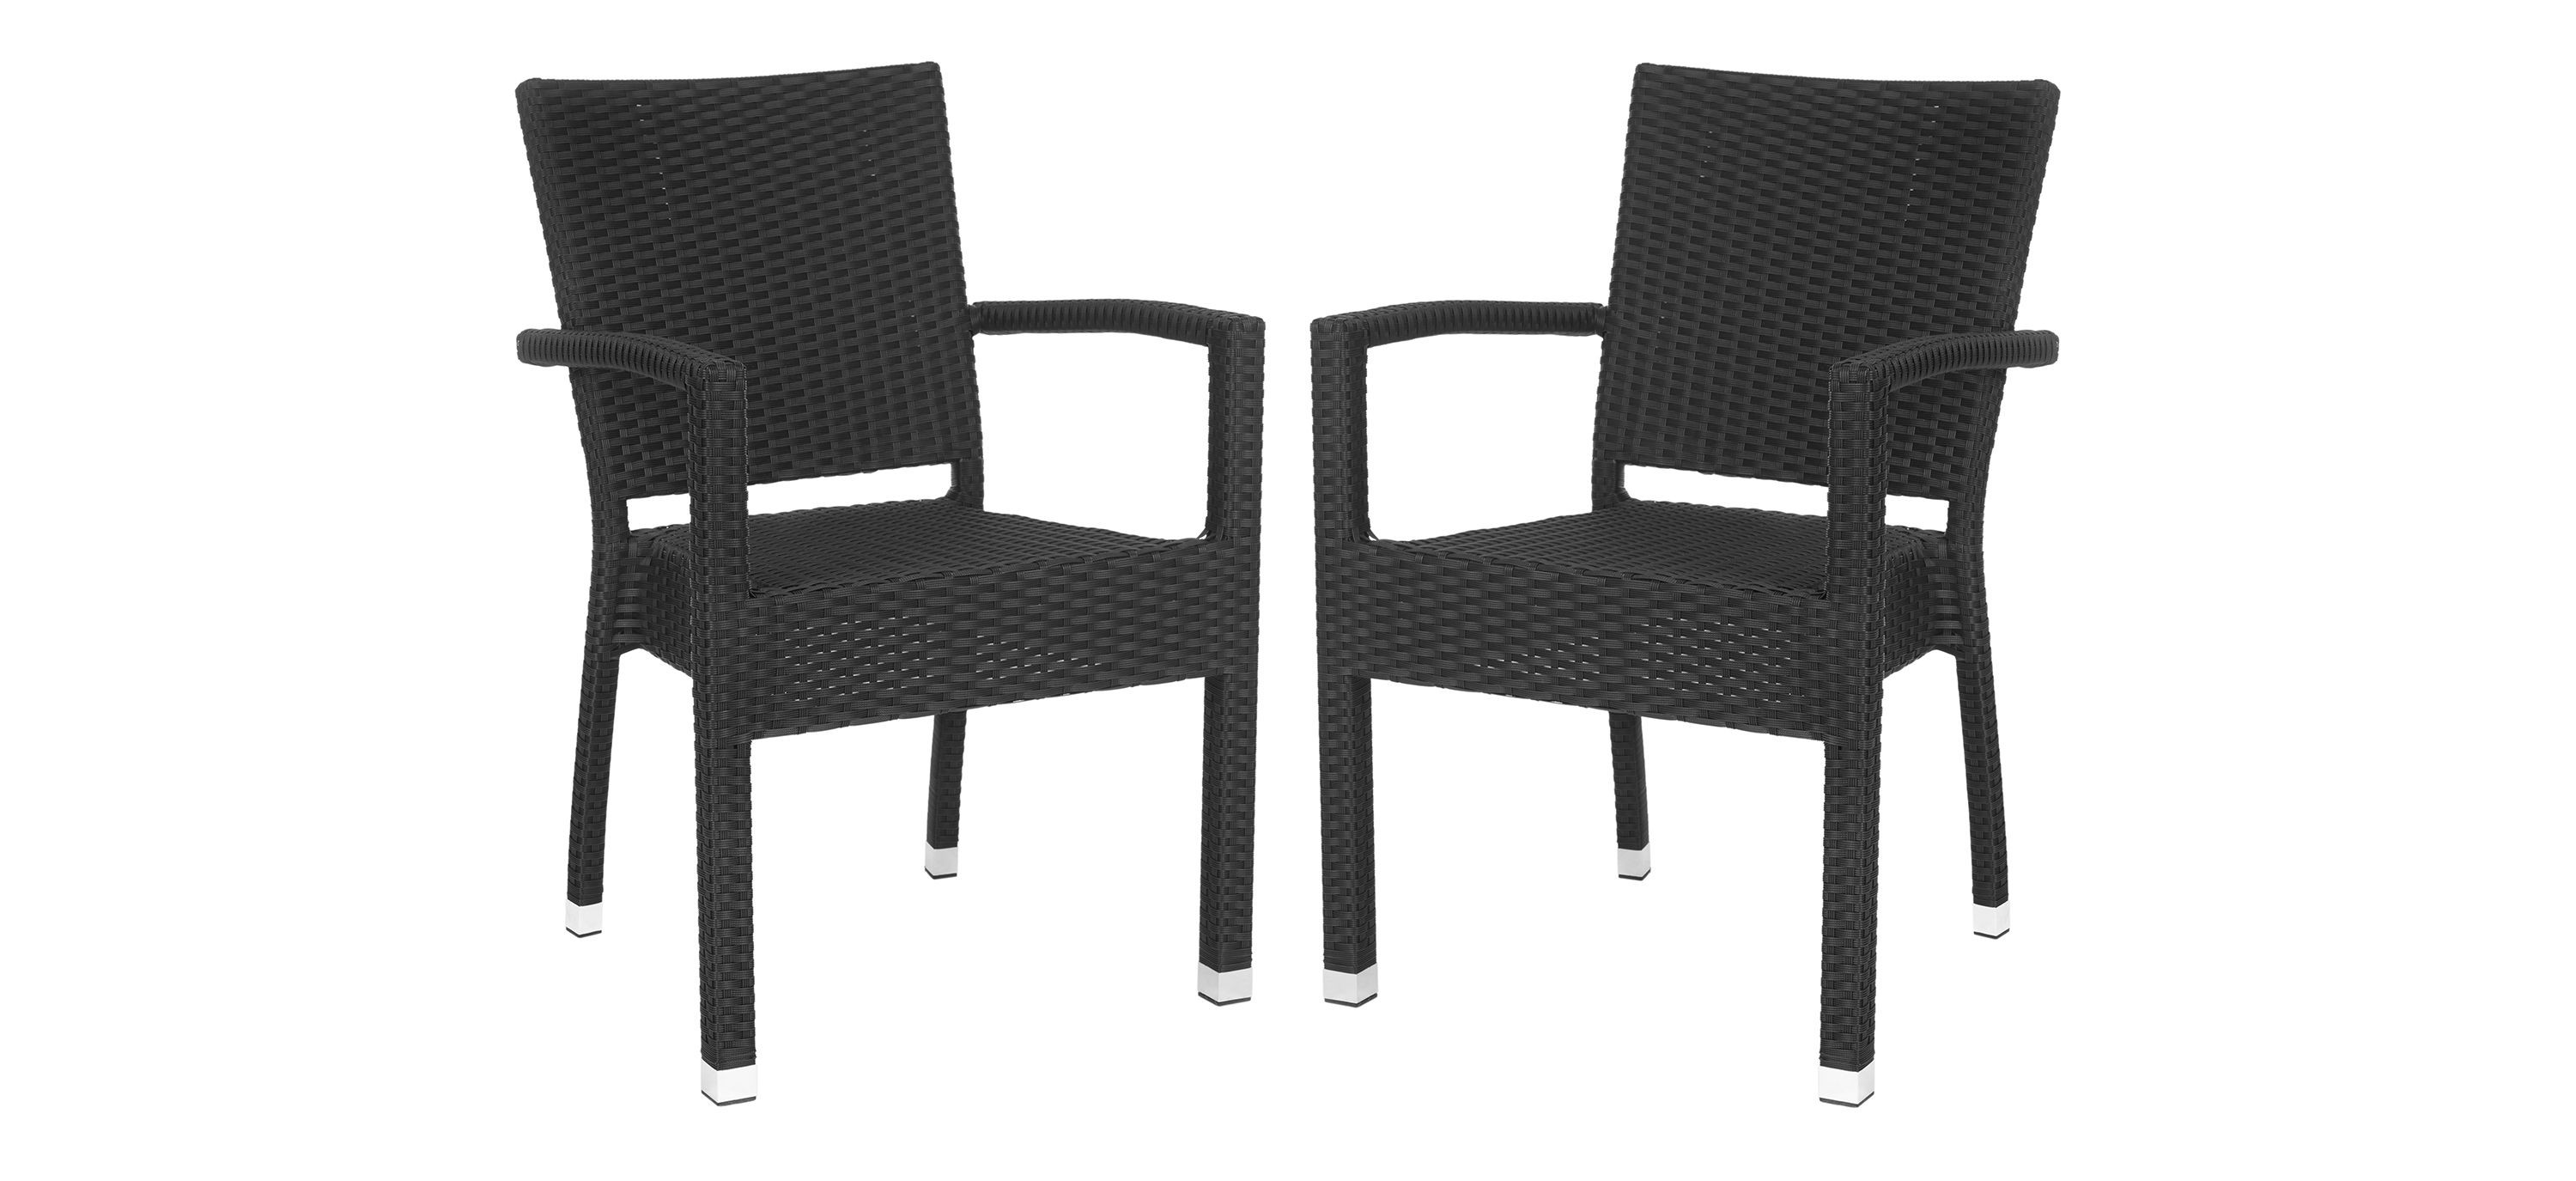 Darryl Outdoor Stacking Arm Chair - Set of 2